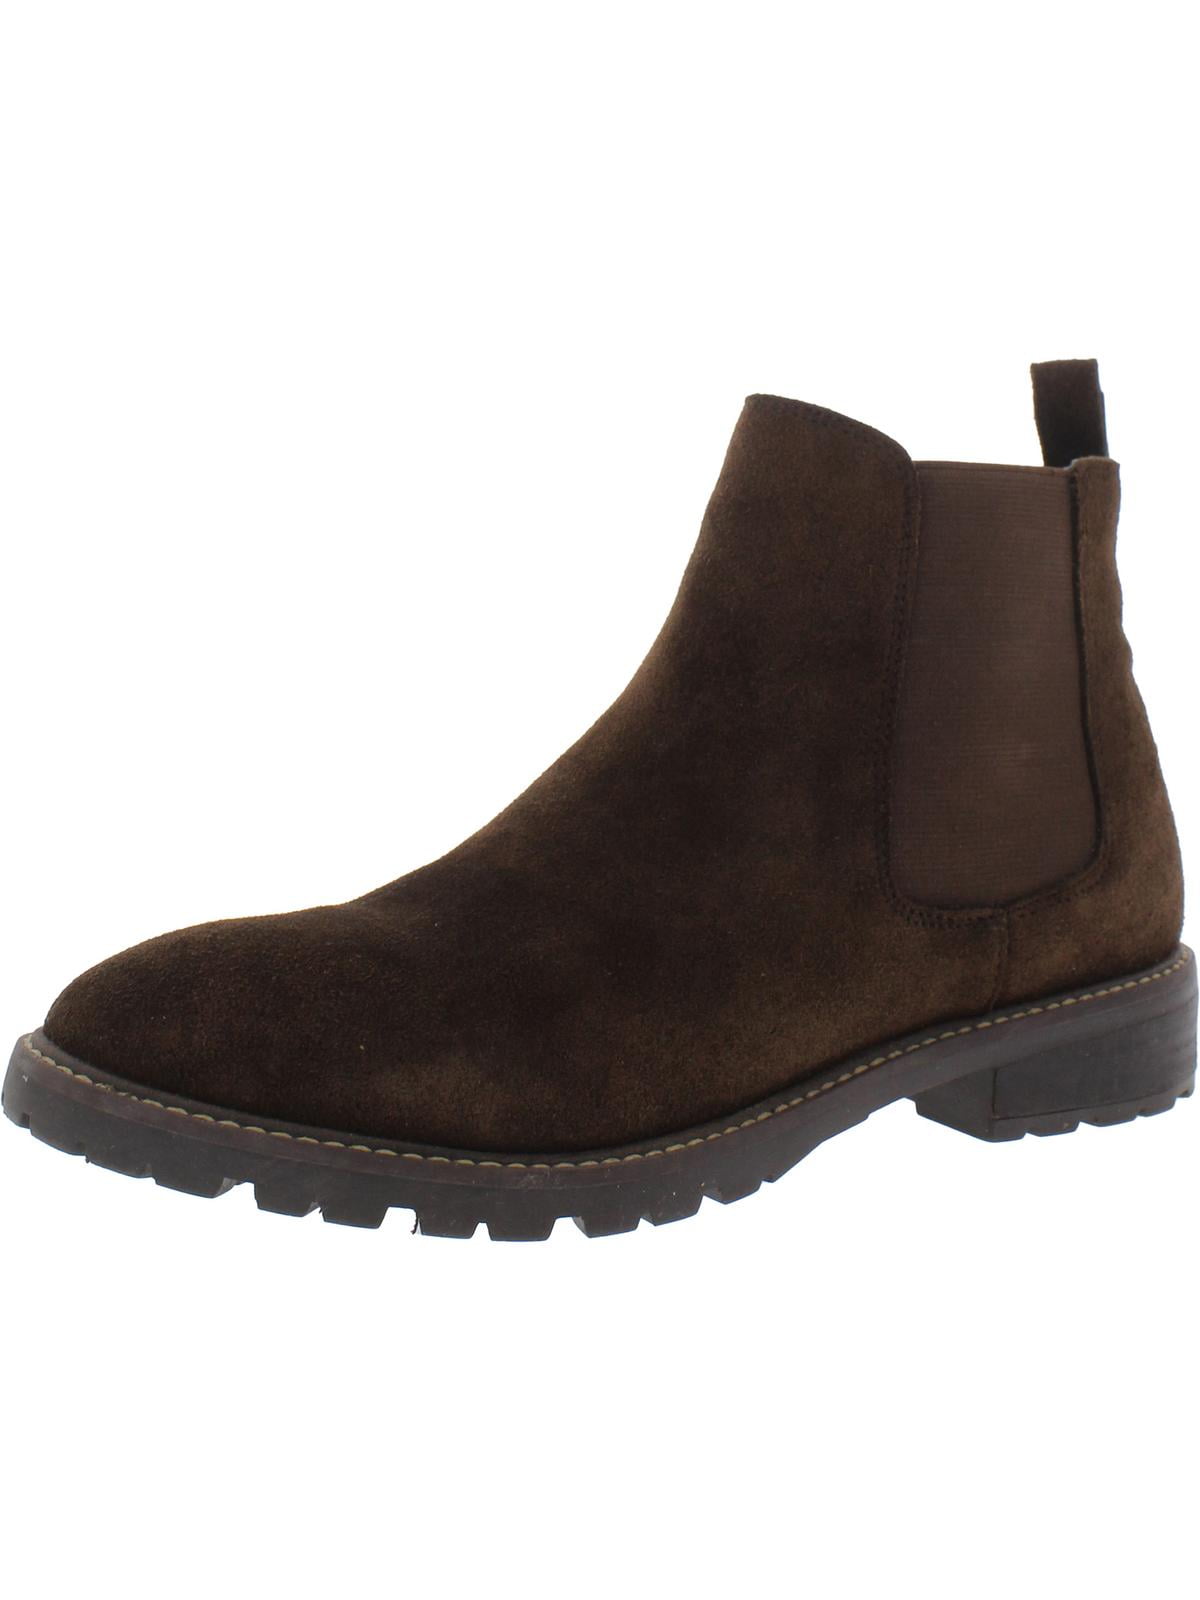 Steve Madden Womens Leopold Leather Round Toe Chelsea Boots - Walmart.com